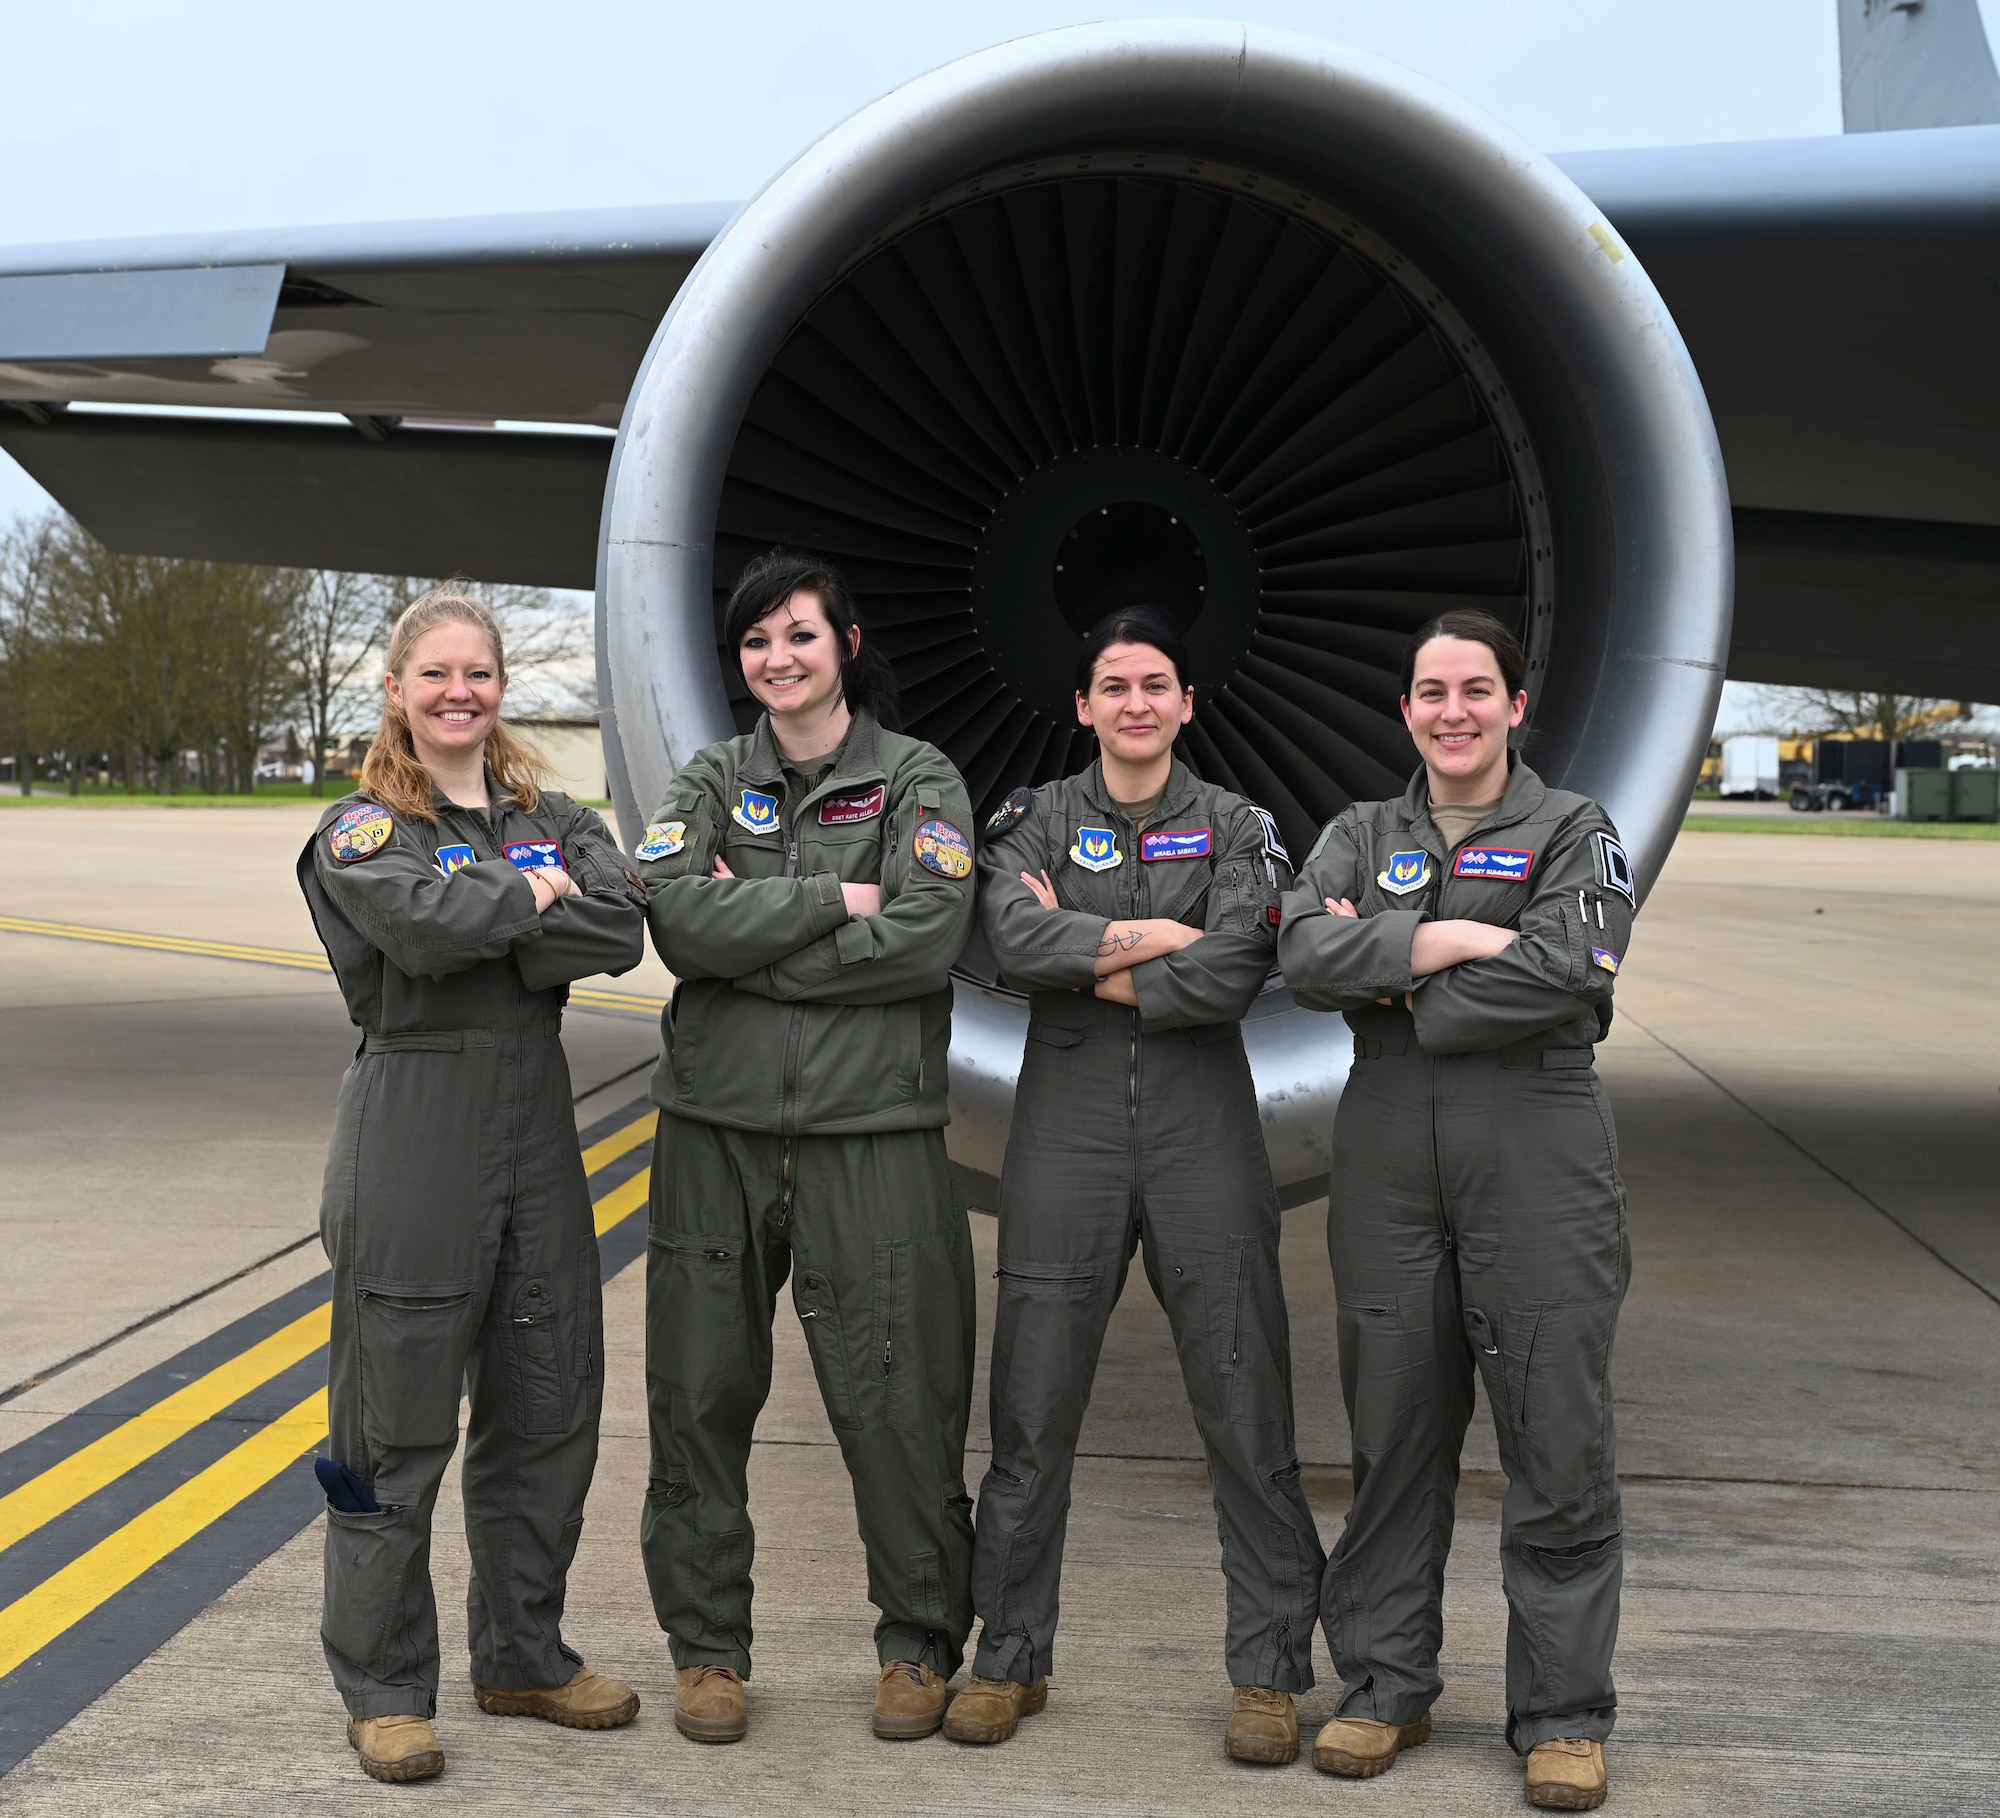 The flight highlights women’s various roles in the 100th Air Refueling Wing, which is to provide responsive air refueling and agile combat support across the full-range of military operations.